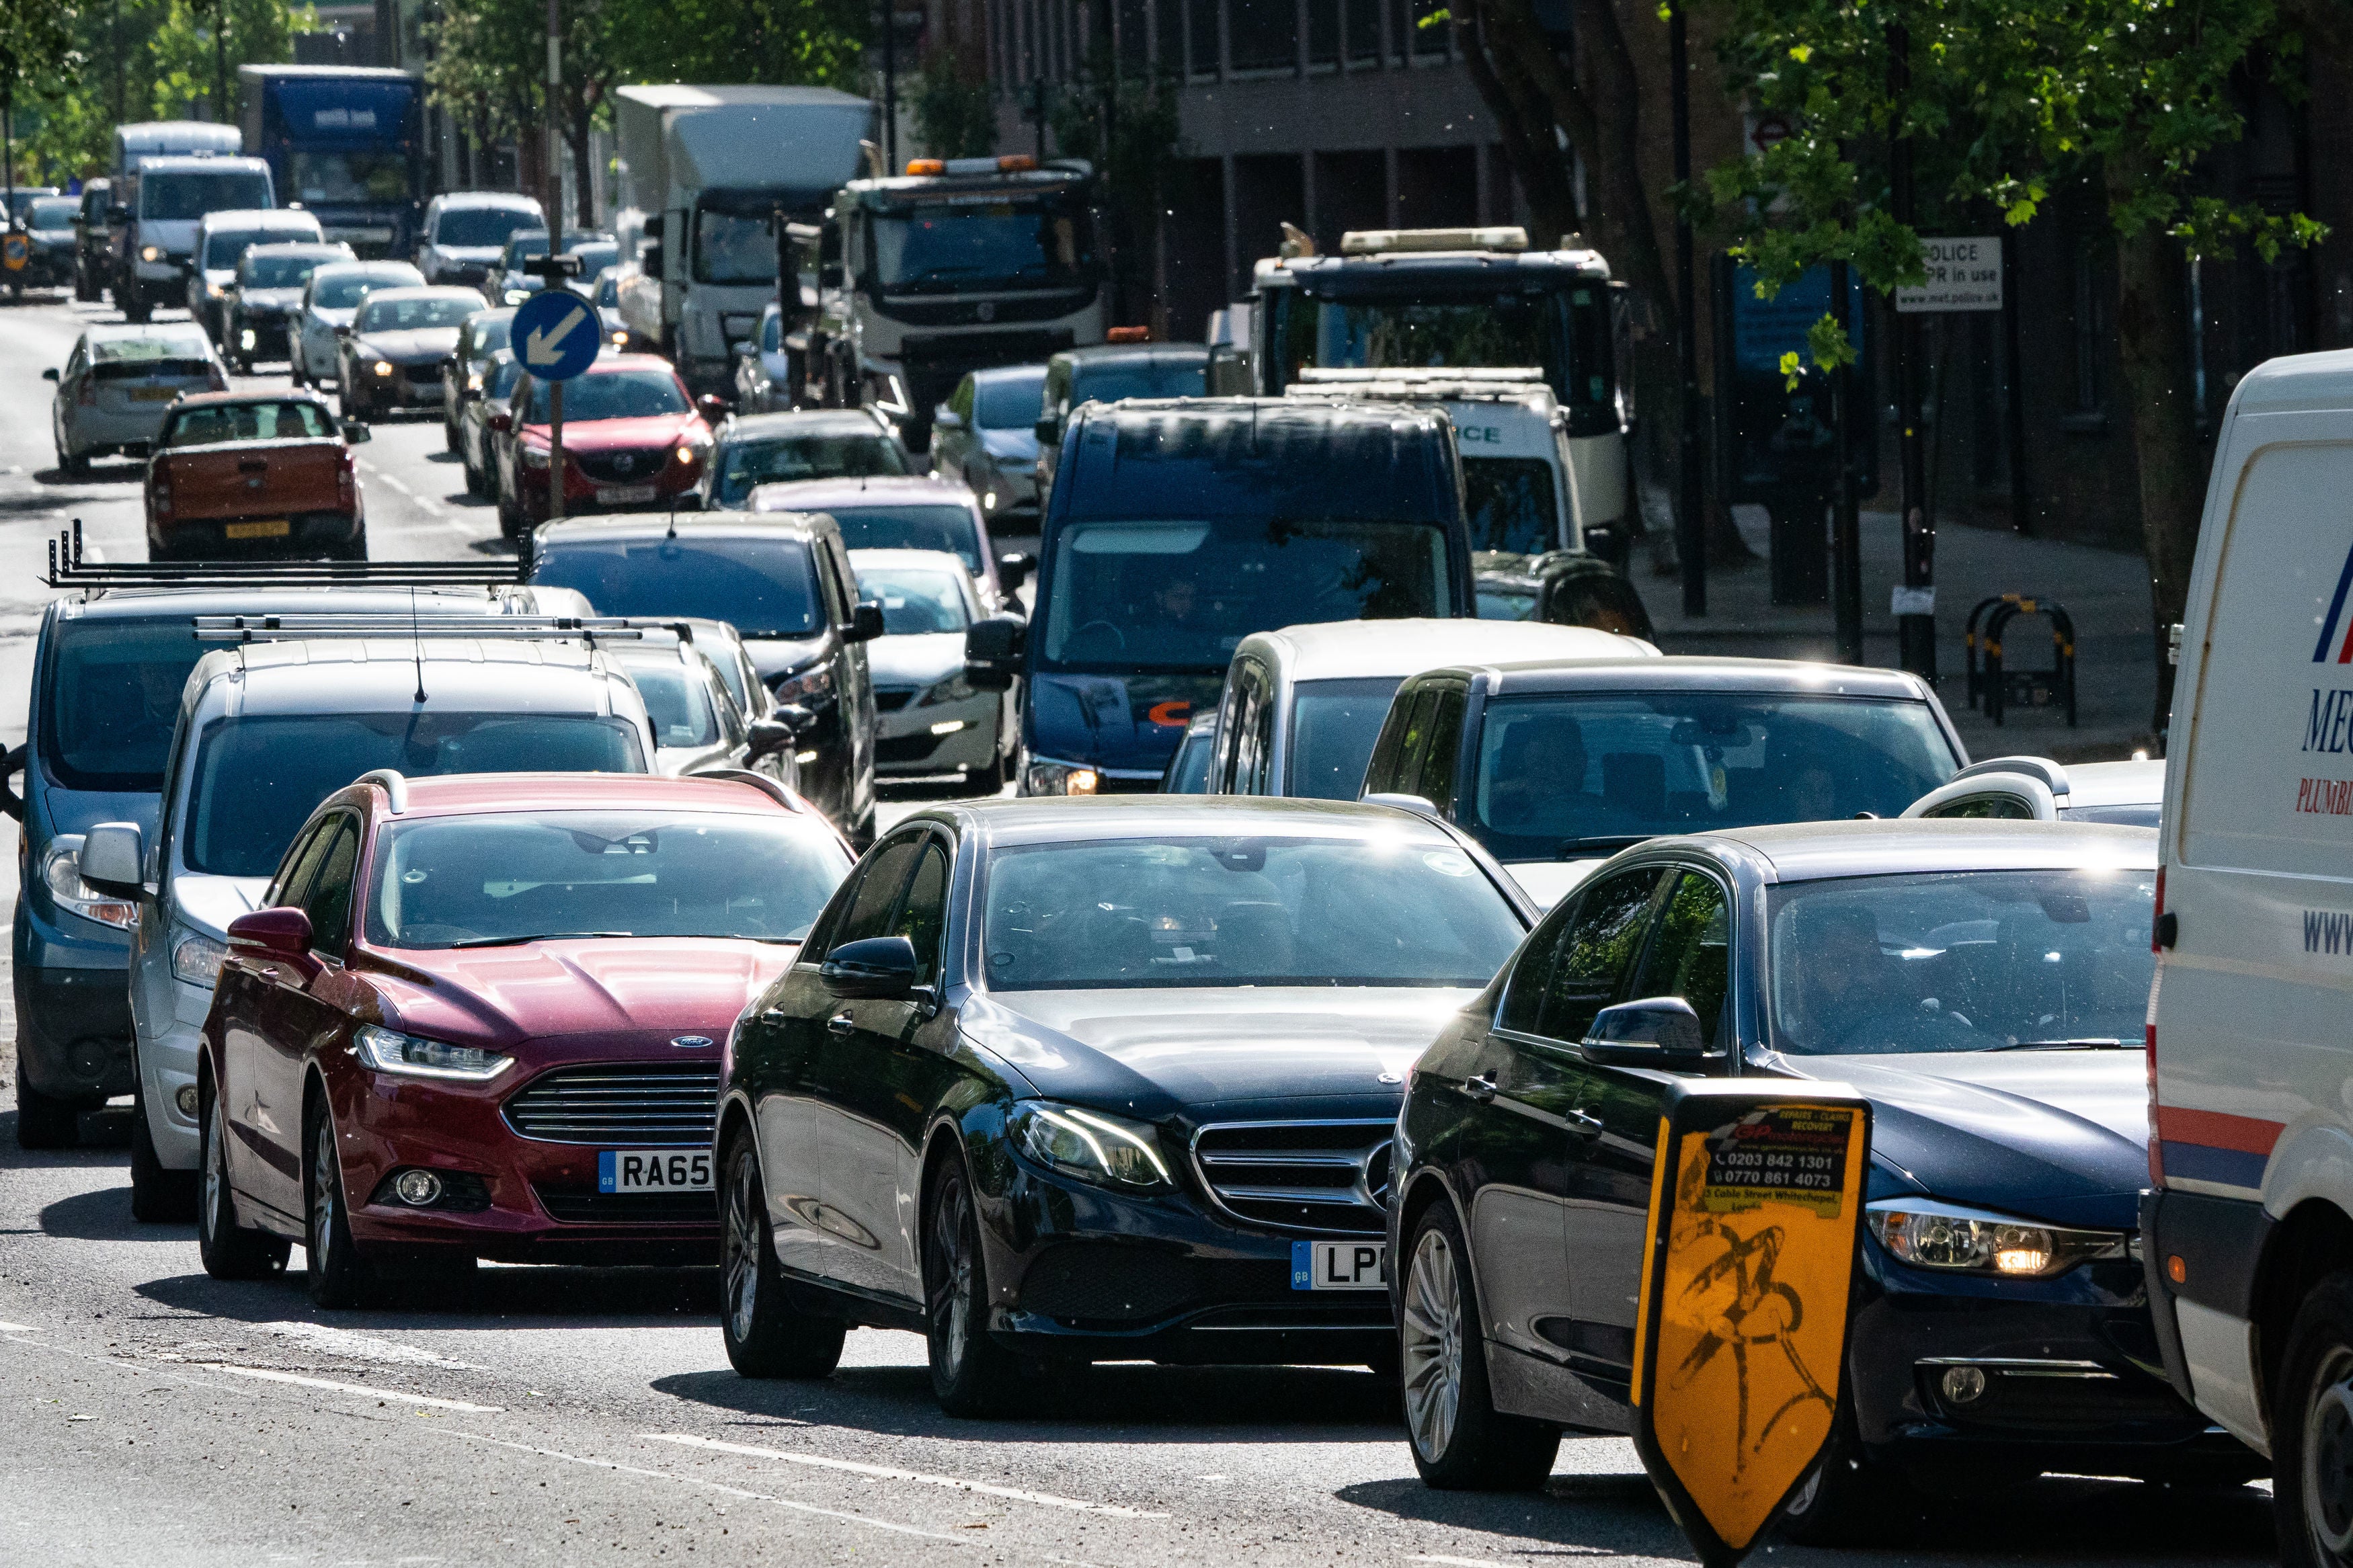 More than half of UK drivers said having access to a car was more important now than before the coronavirus pandemic